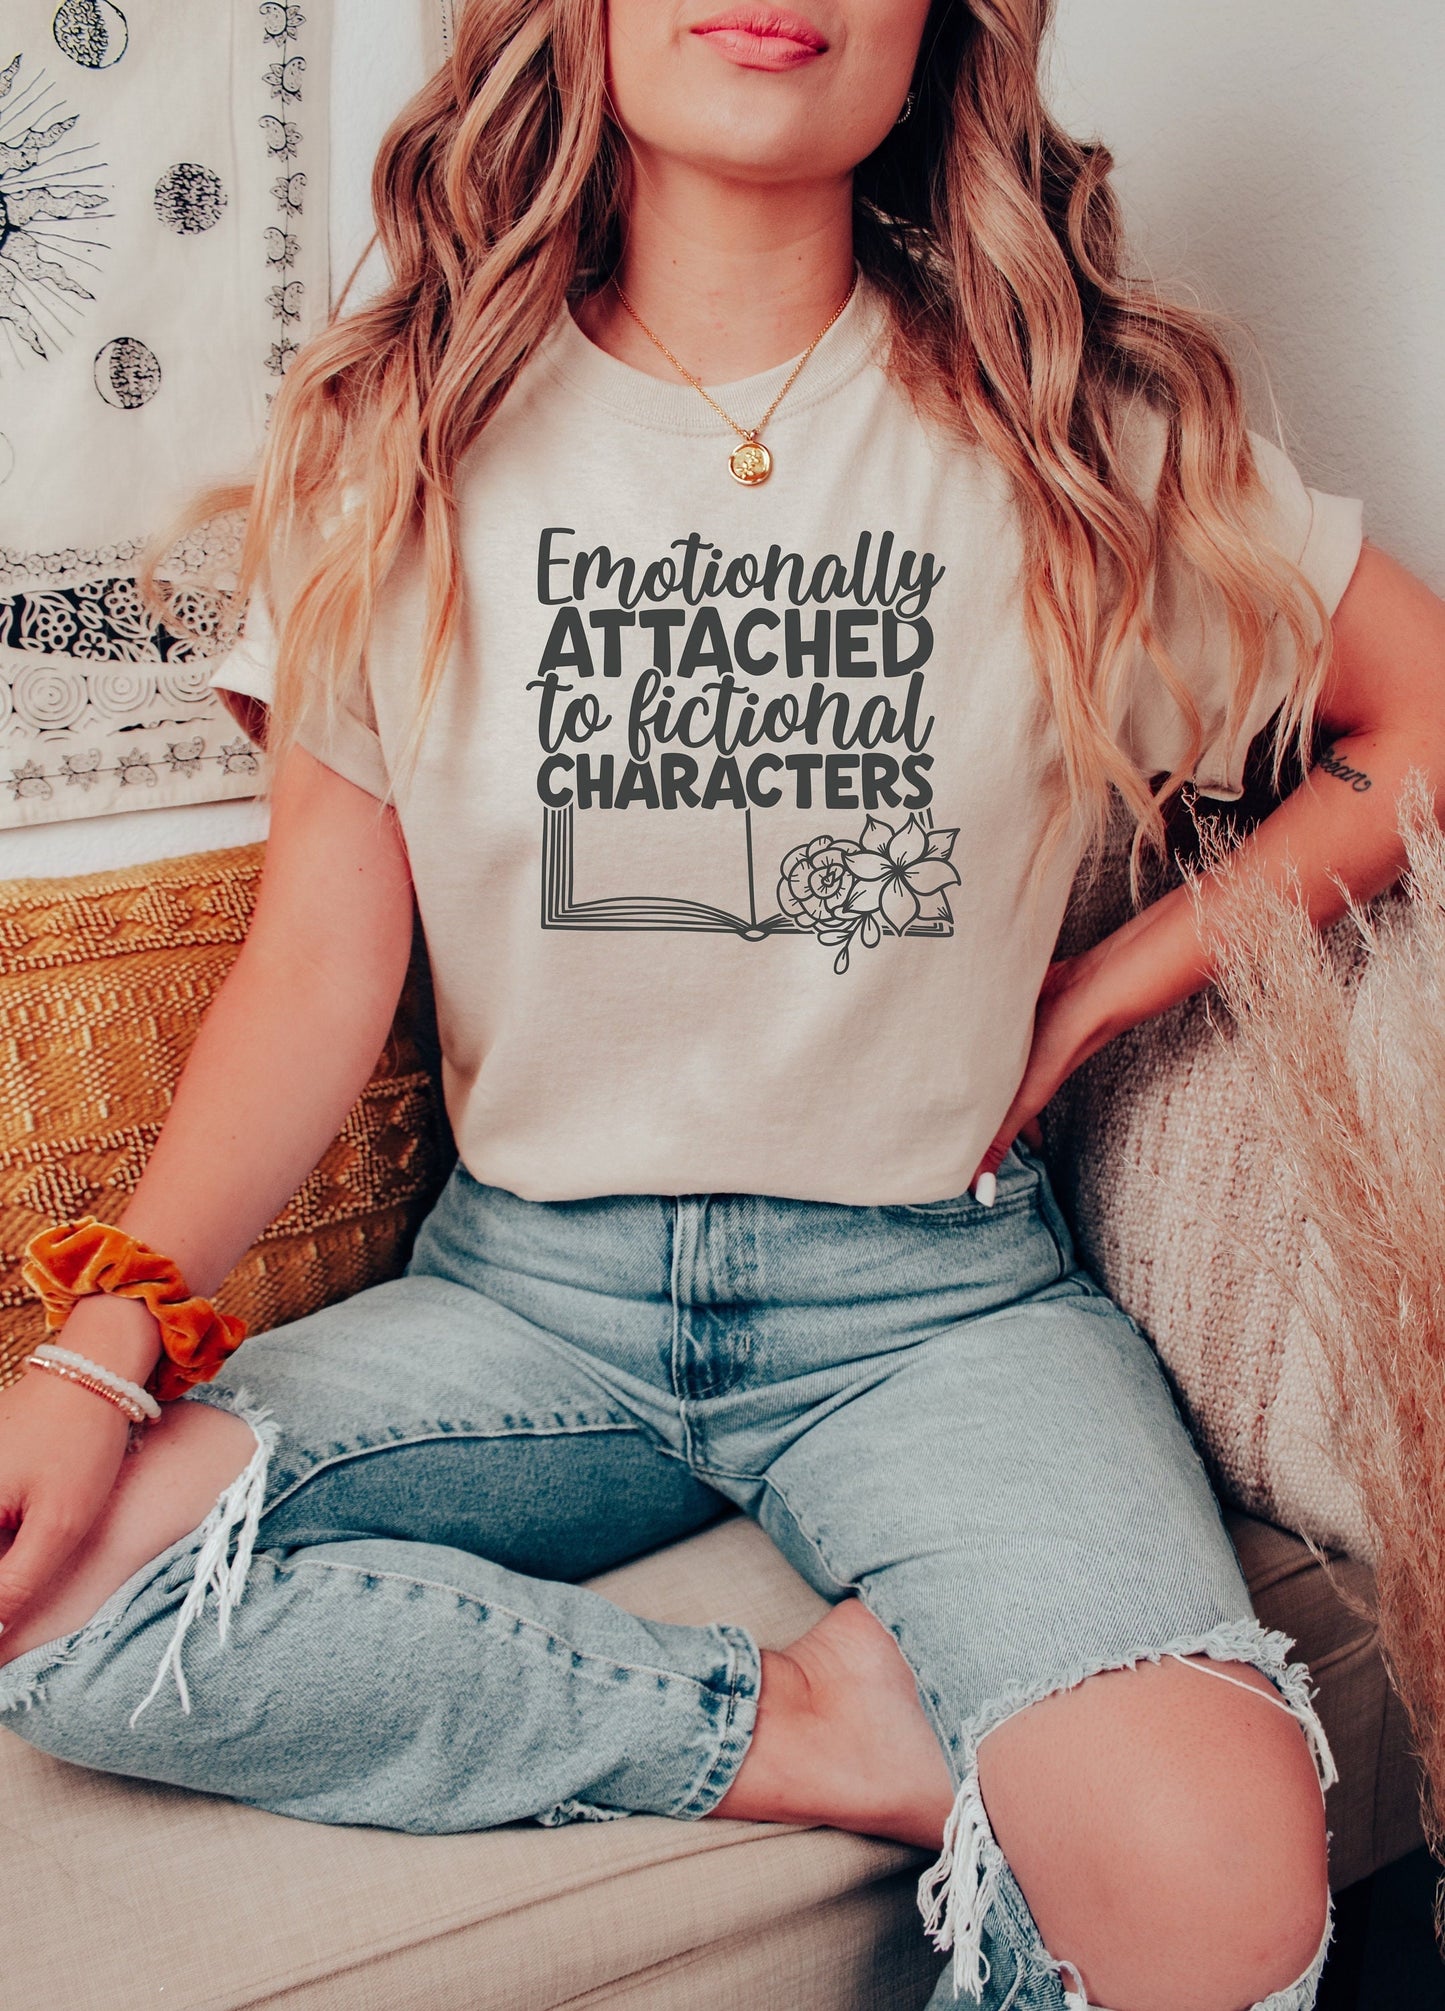 Emotionally Attached to Fictional Characters Book Shirt, Book Shirt, Book Lovers Shirt, Bookish Shirt, Book Merch